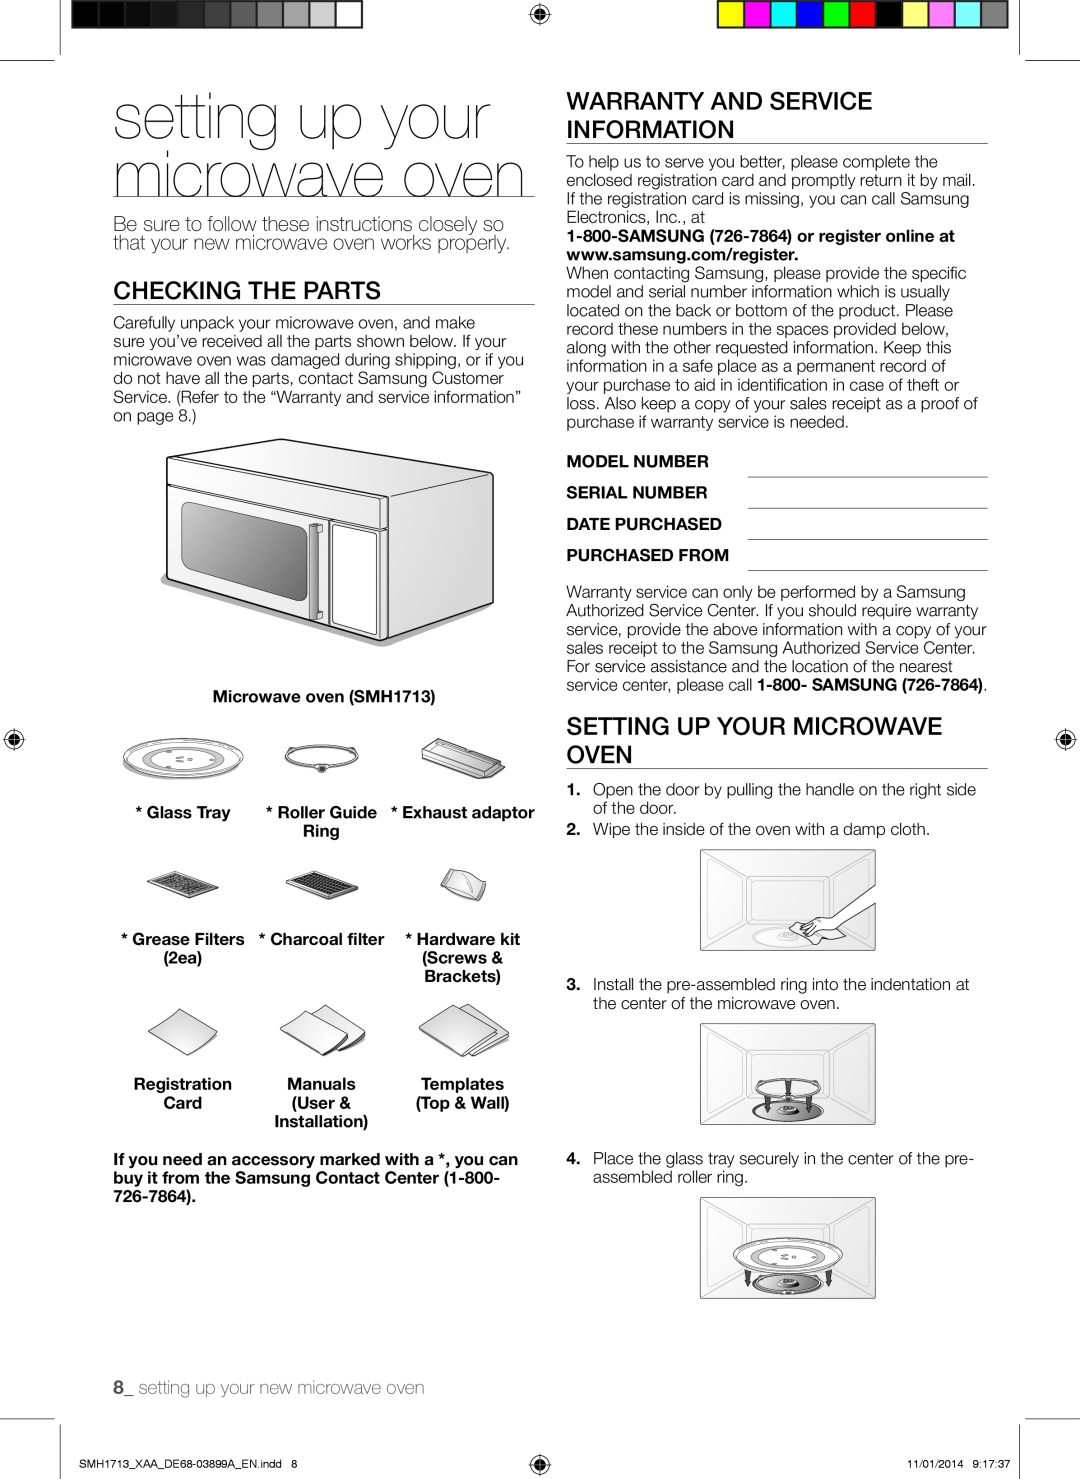 Samsung SMH1713 setting up your microwave oven, Checking the parts, Warranty and service information, Glass Tray, Ring 